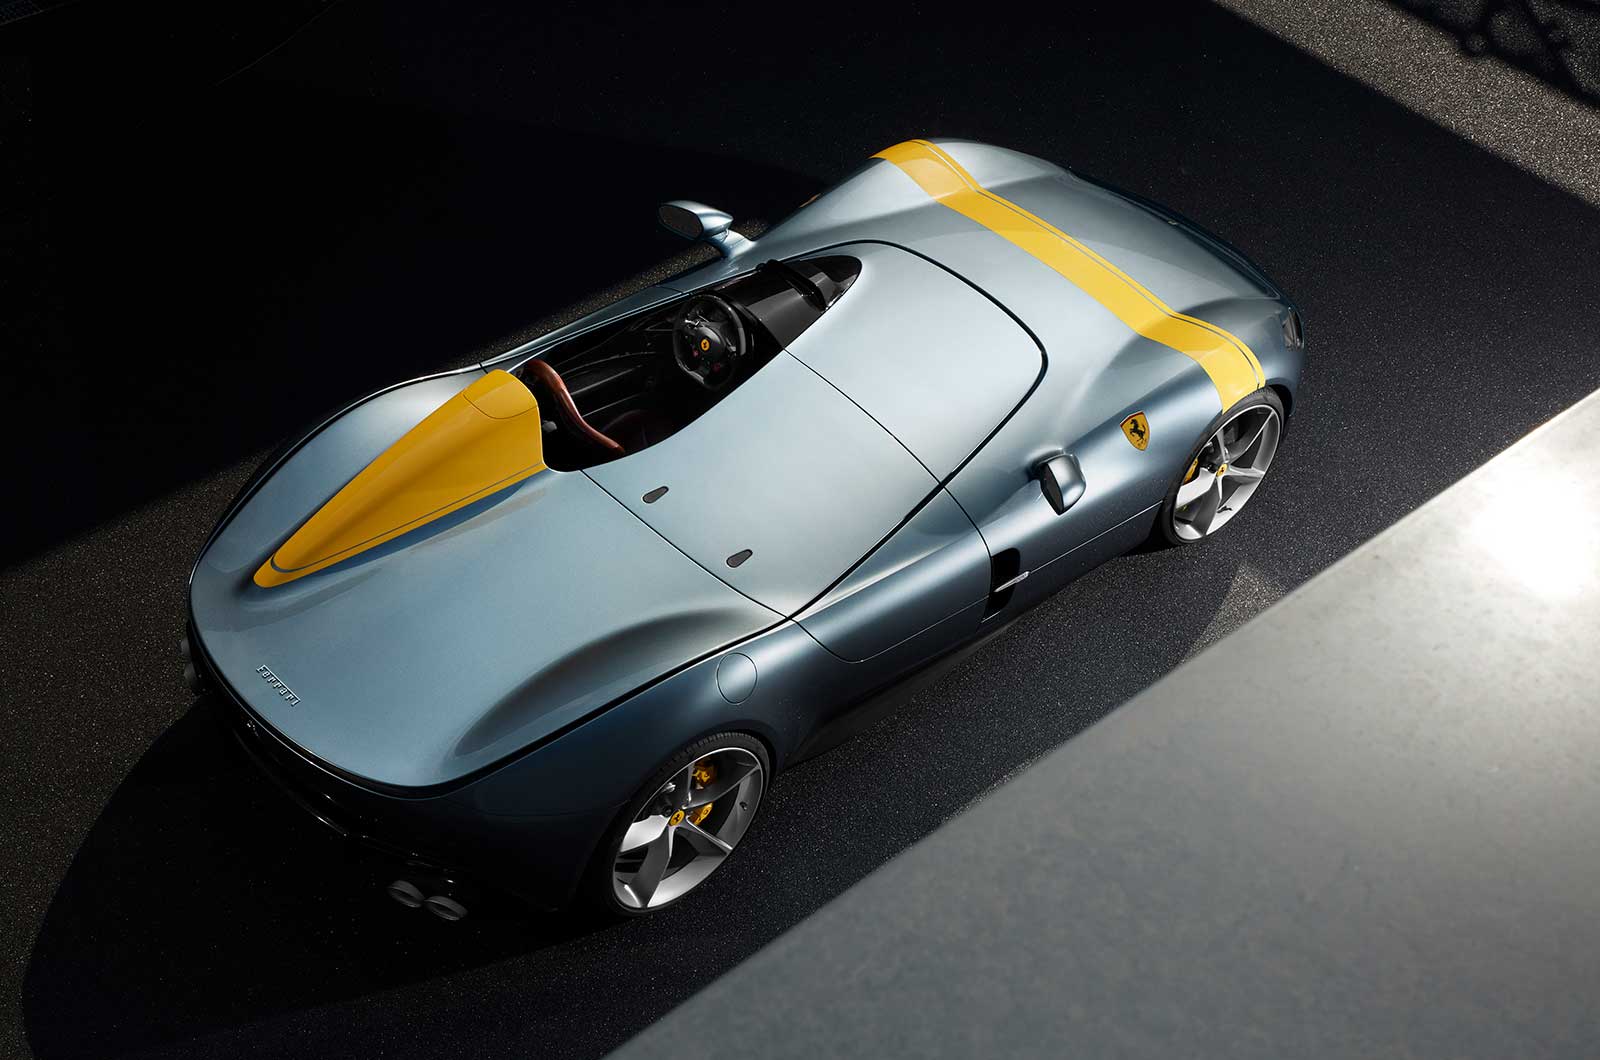 Classic & Sports Car – Ferrari’s new Monza SP1 and SP2 hark back to the ’50s in style